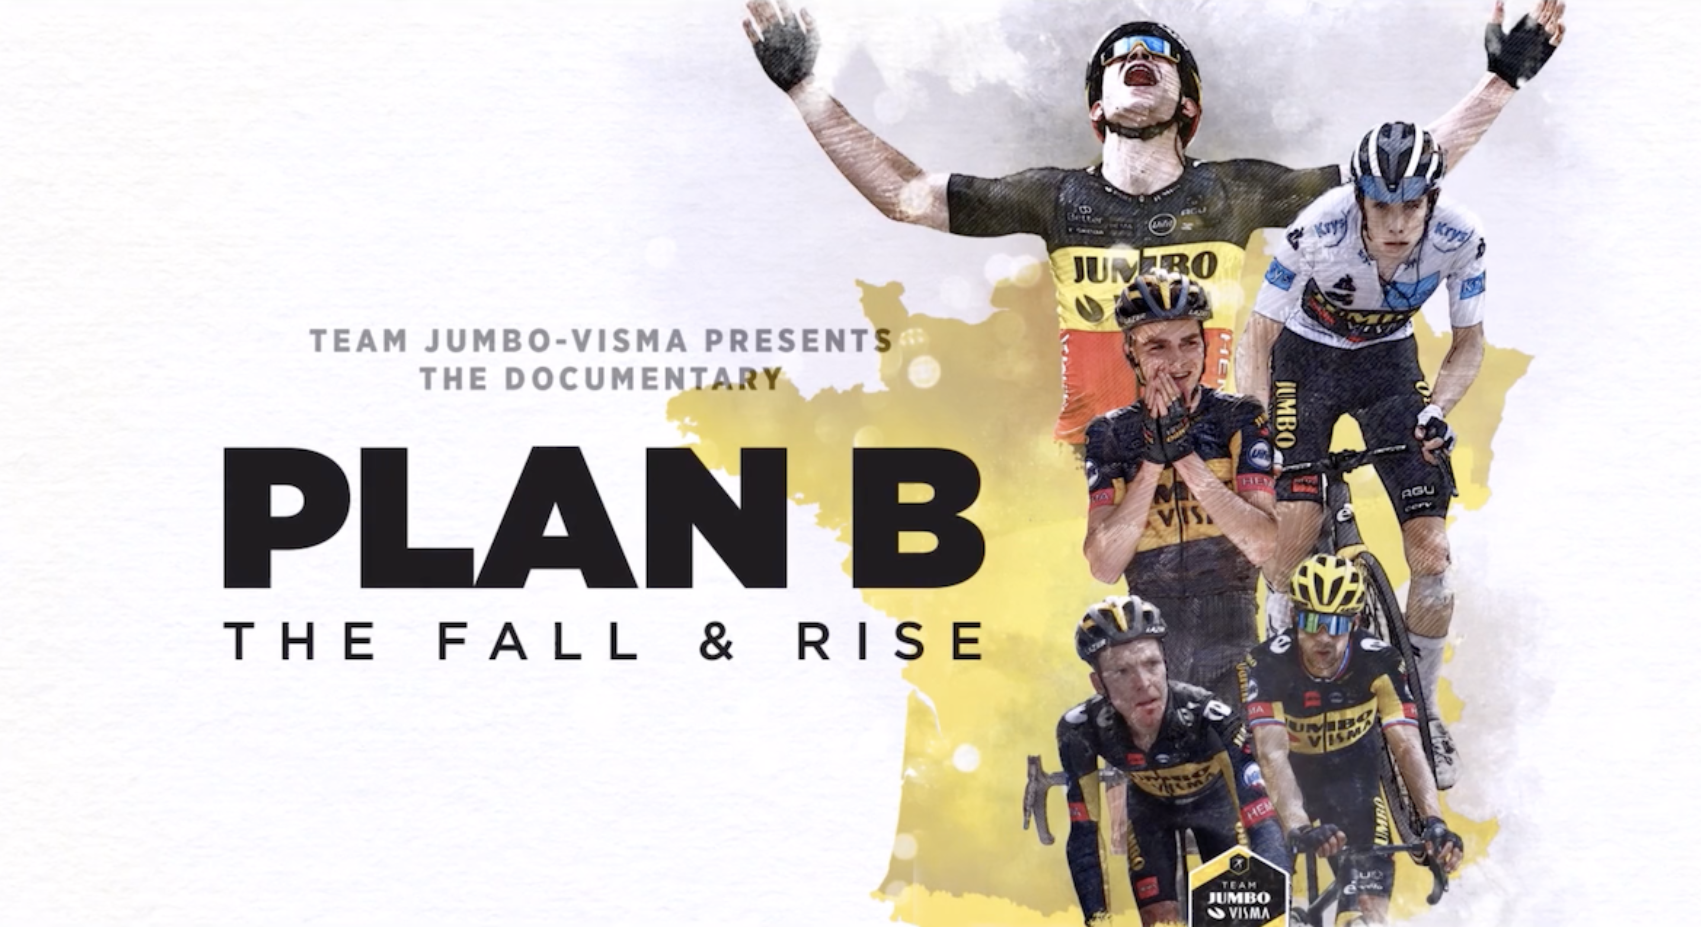 Watch our Tour de France documentary Plan B, the fall & rise for free	